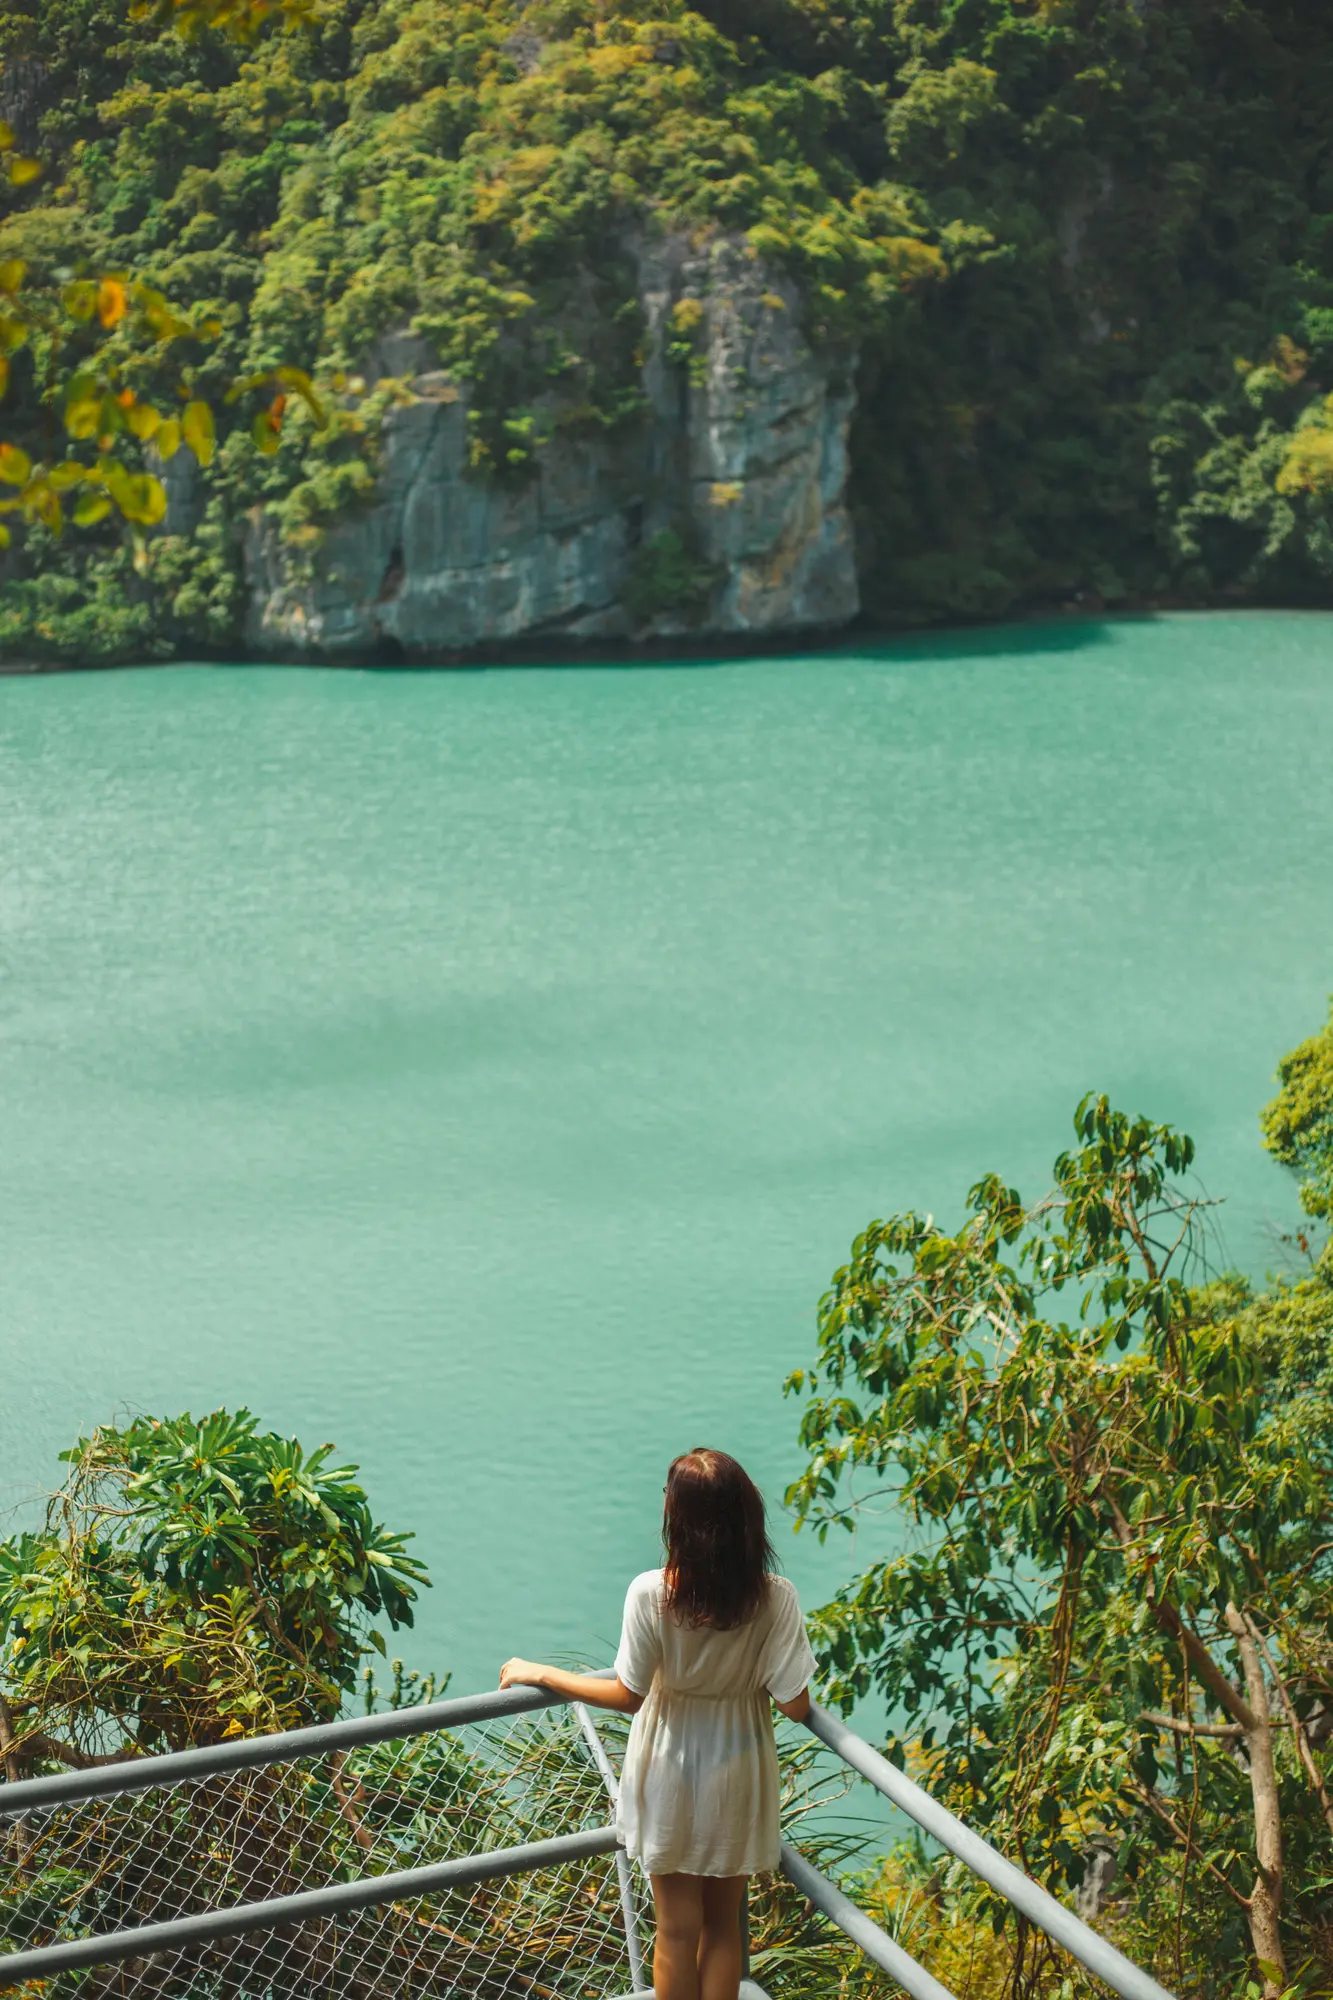 Girl in a white dress standing on a platform looking out over green water in Ang Thong National Marine Park - Thailand vs. Indonesia